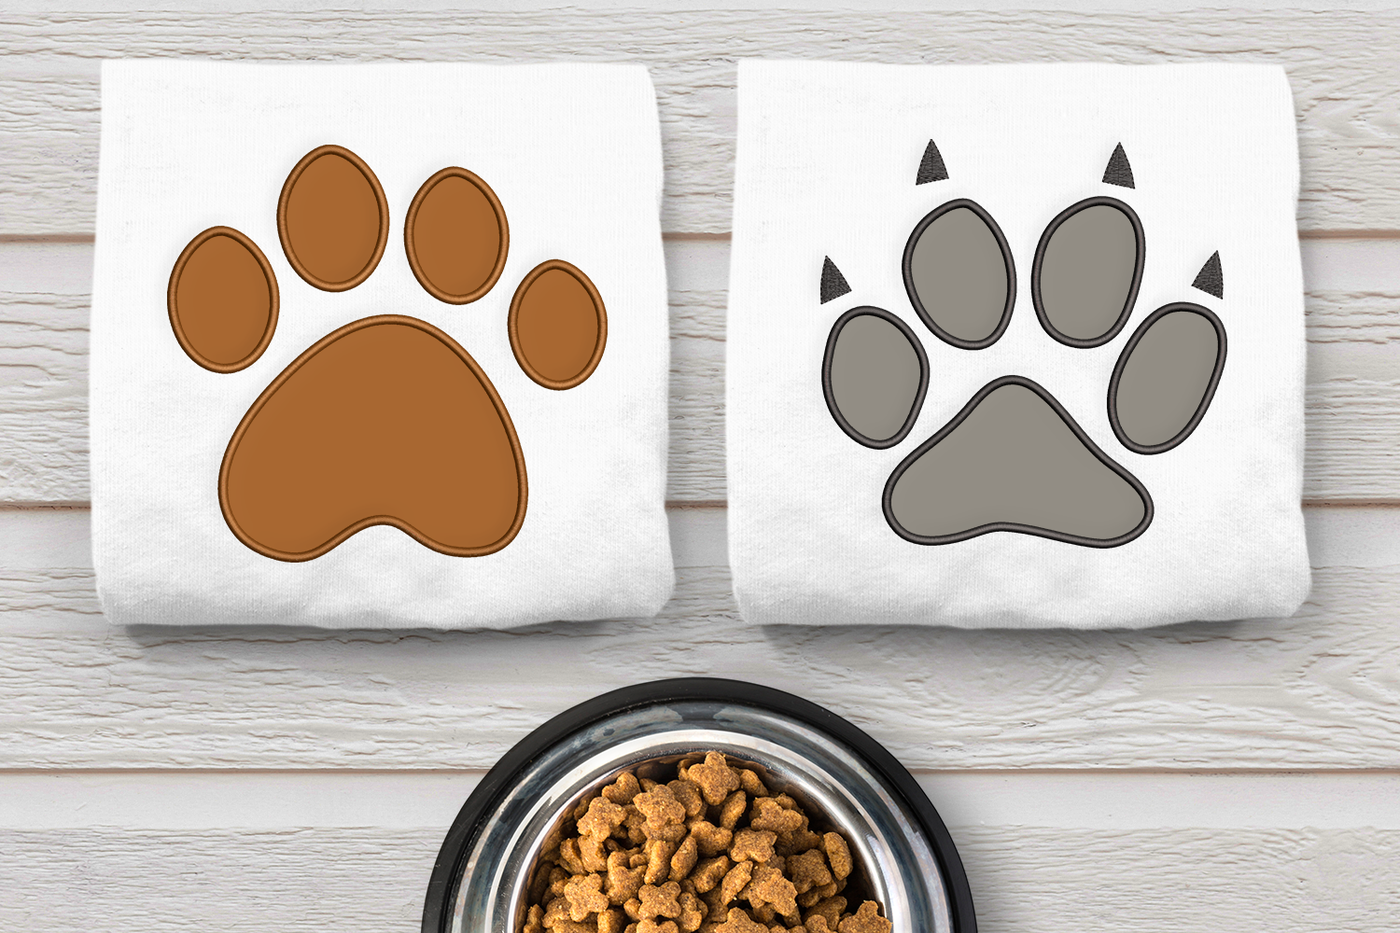 Dog and cat paw applique embroidery designs. Shown stitched onto white folded fabric. The fabric is on a wooden surface with a pet bowl nearby.